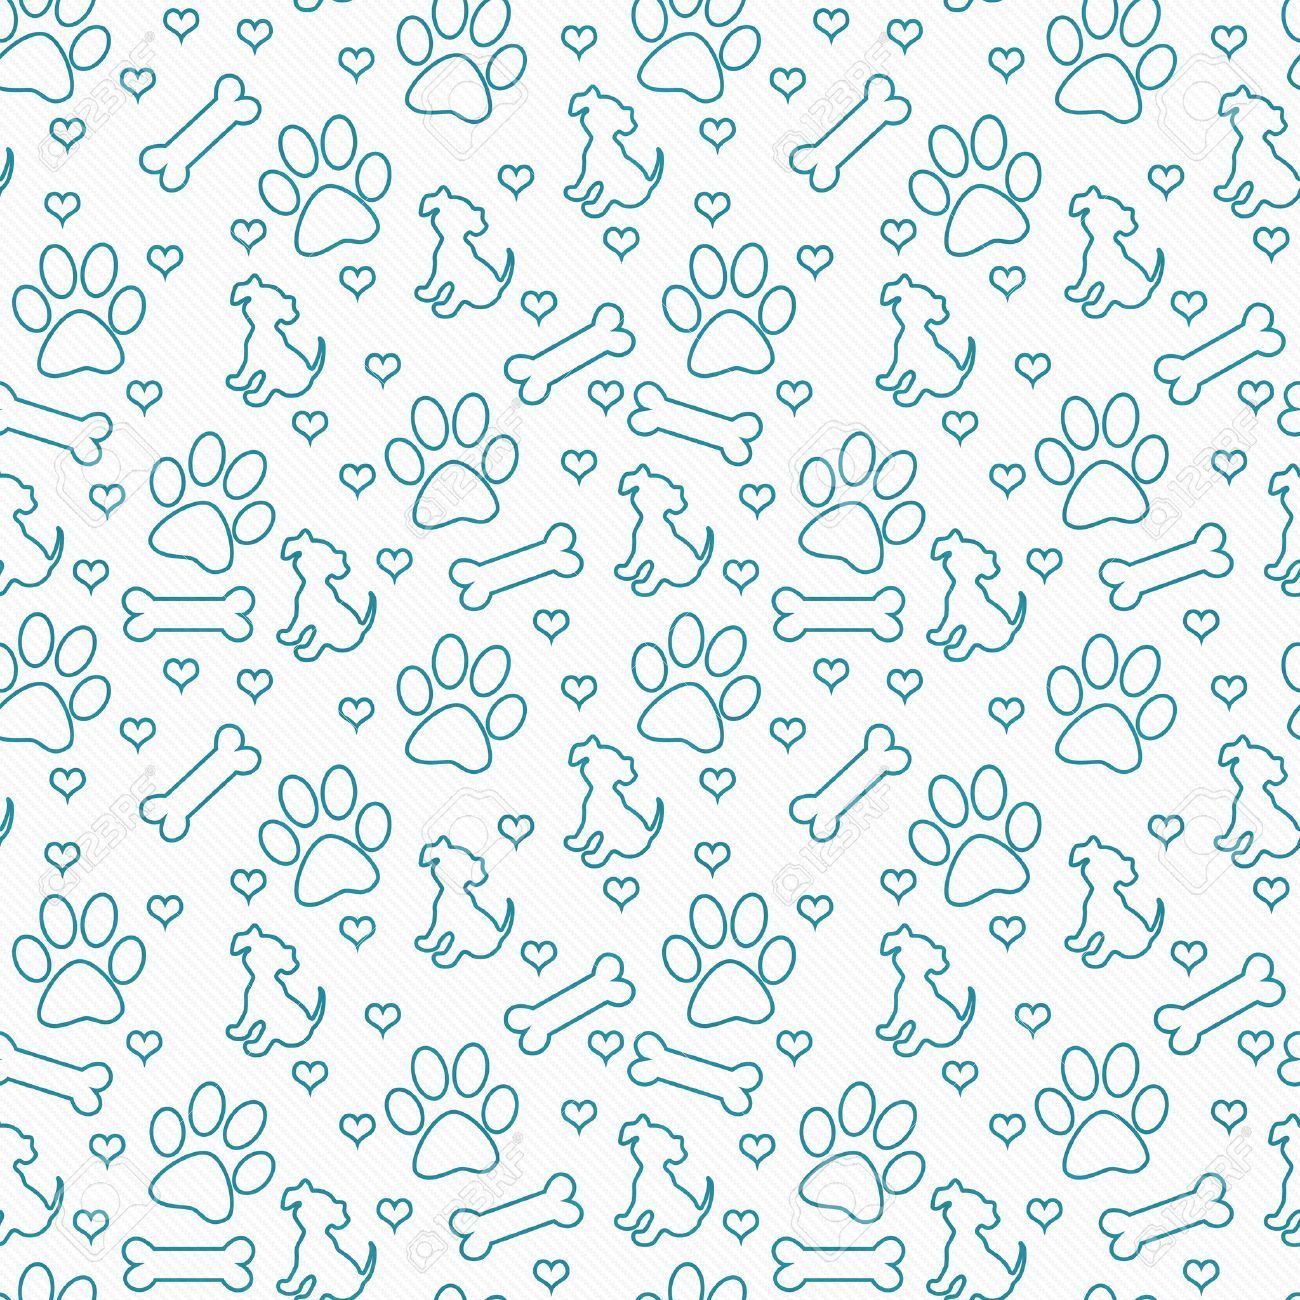 Teal And White Dog Paw Prints Puppy Bone And Hearts Tile Pattern. Paw print background, Dog paw print, Paw print